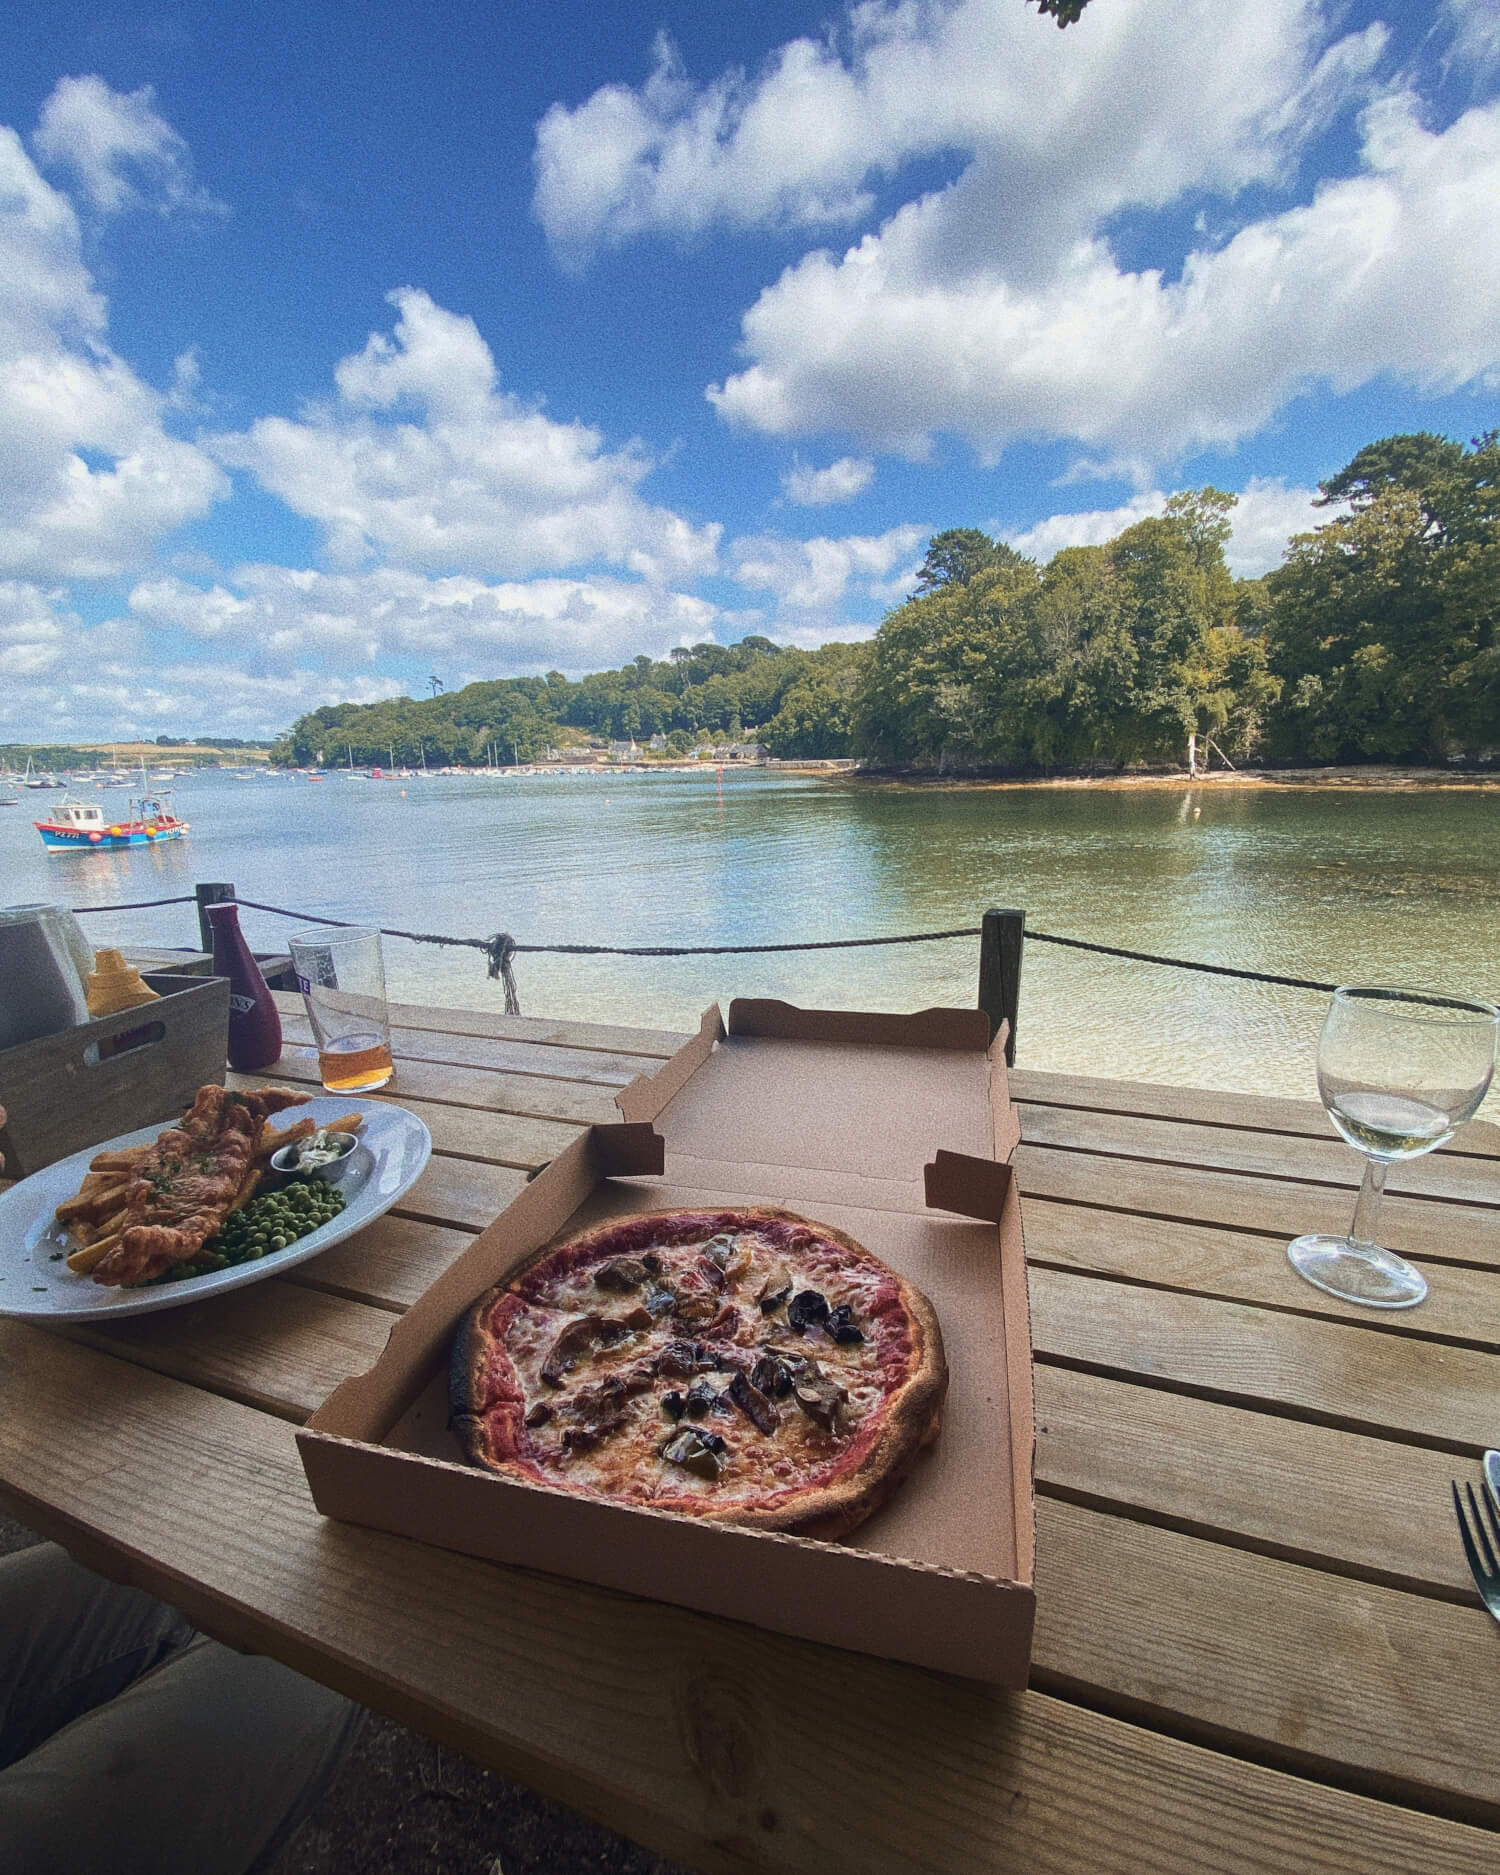 Where to eat in Cornwall